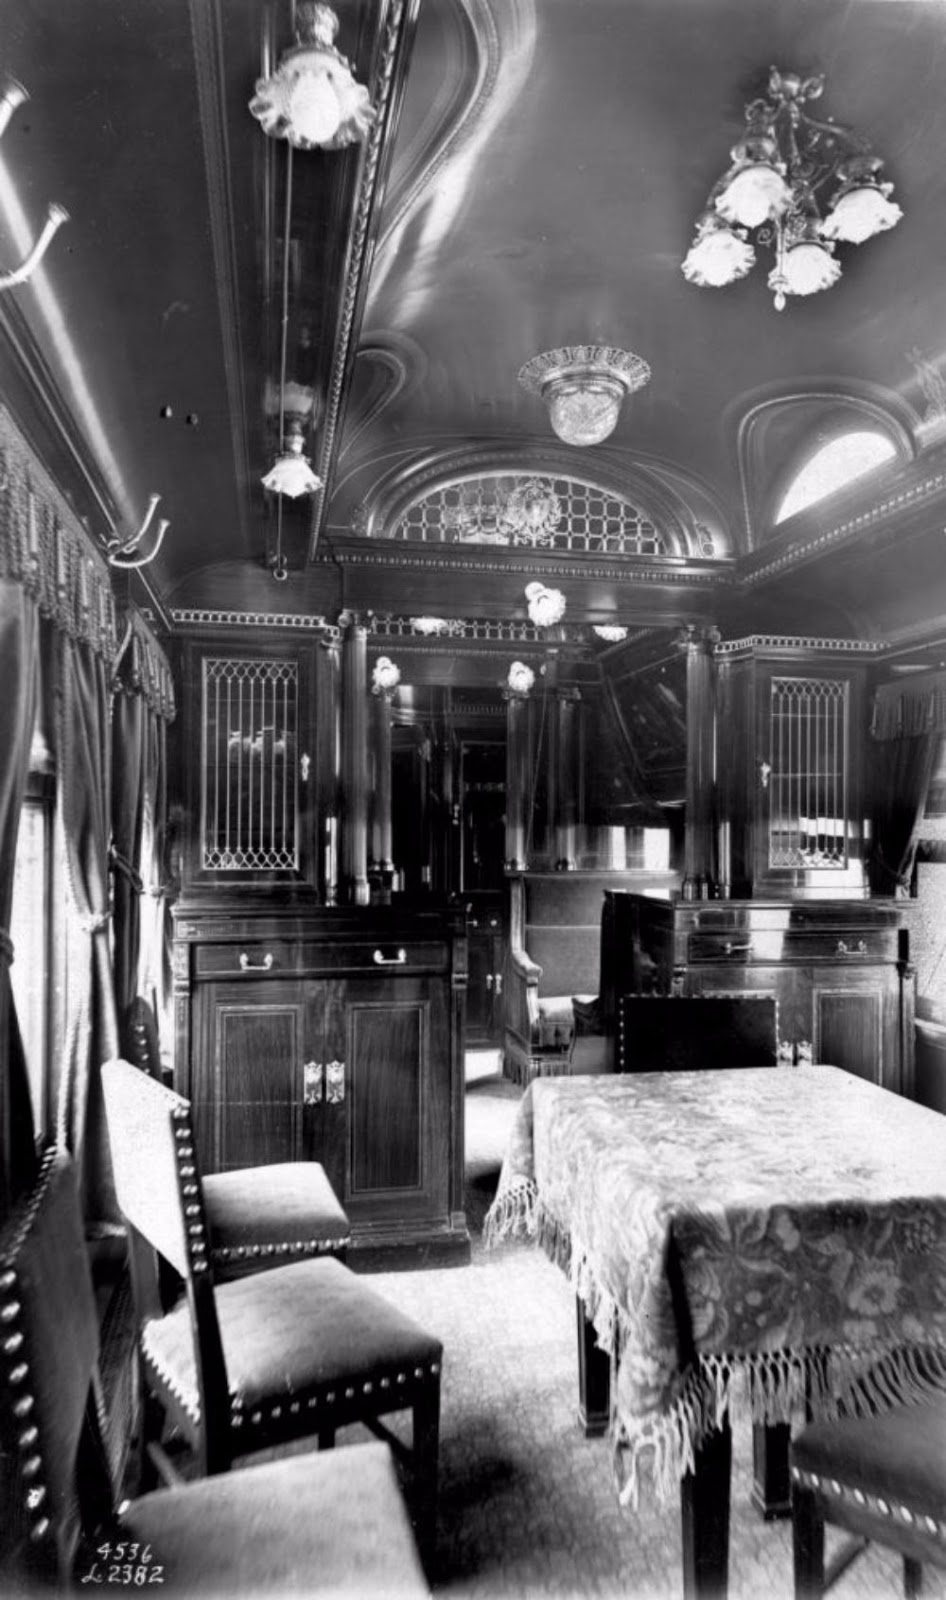 The Glory Days Of Train Travel Inside The Pullman Train